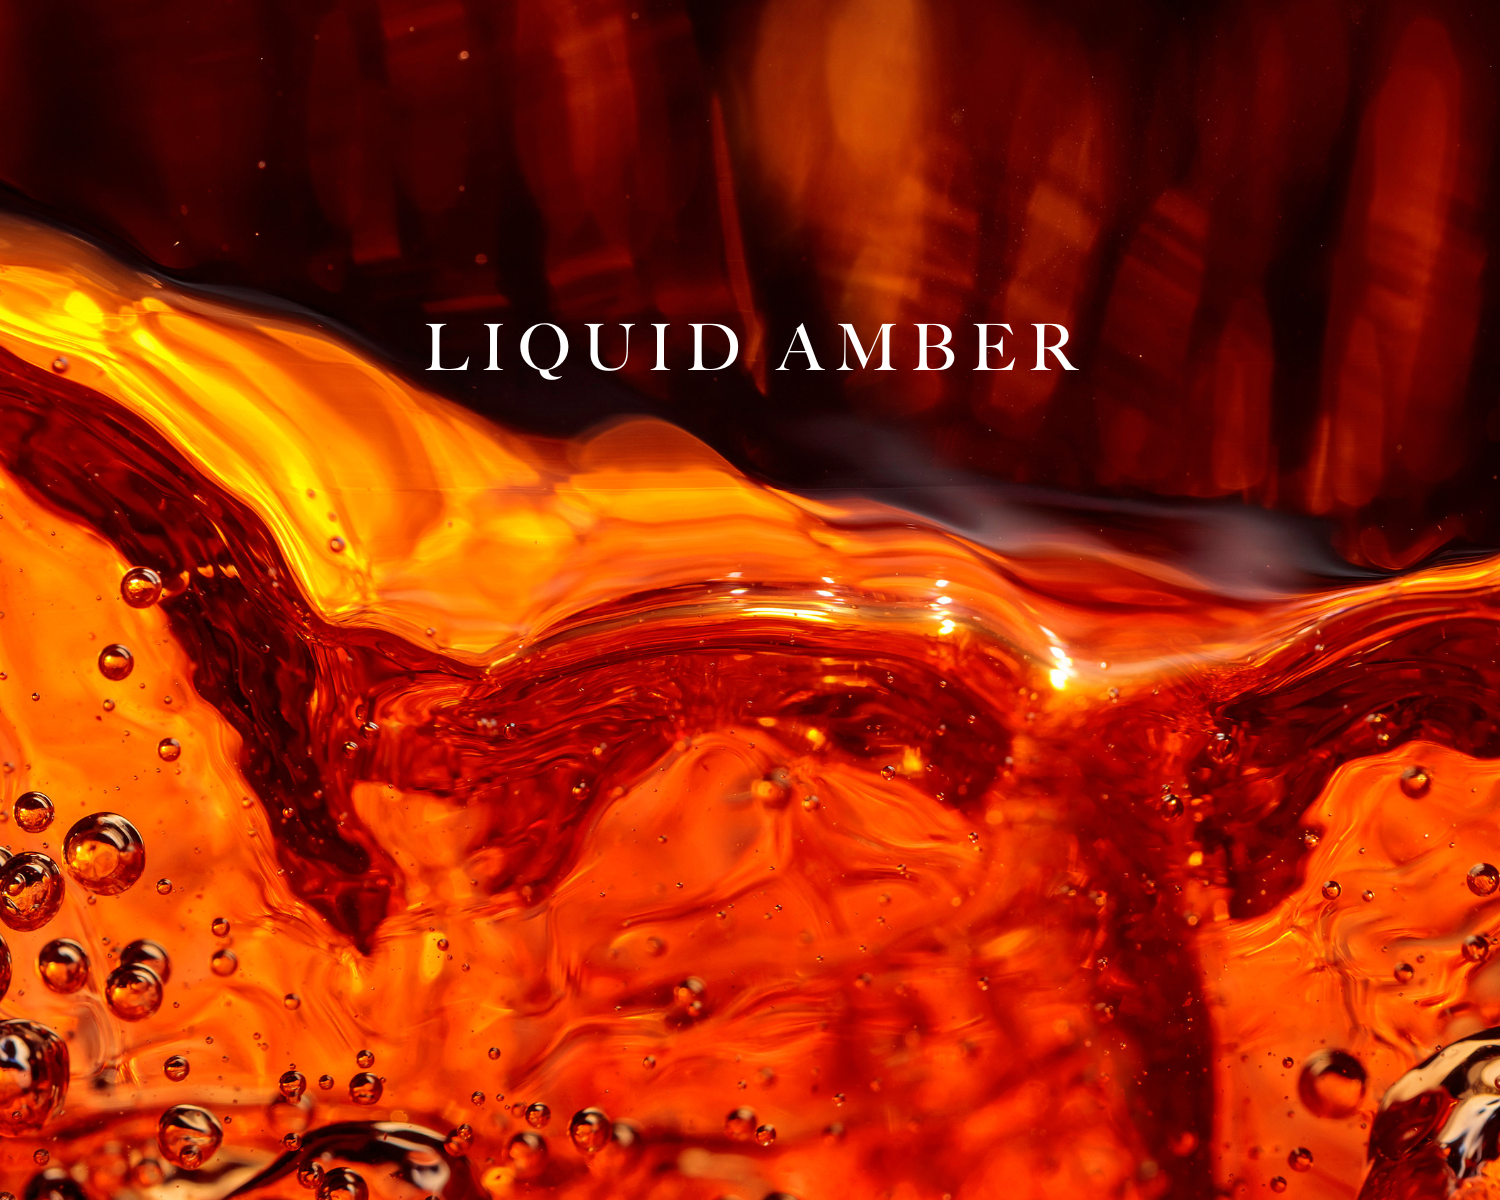 Caswell-Massey Marem Perfume for Women: "Liquid Amber" with image of liquid amber to represent one of the scent notes